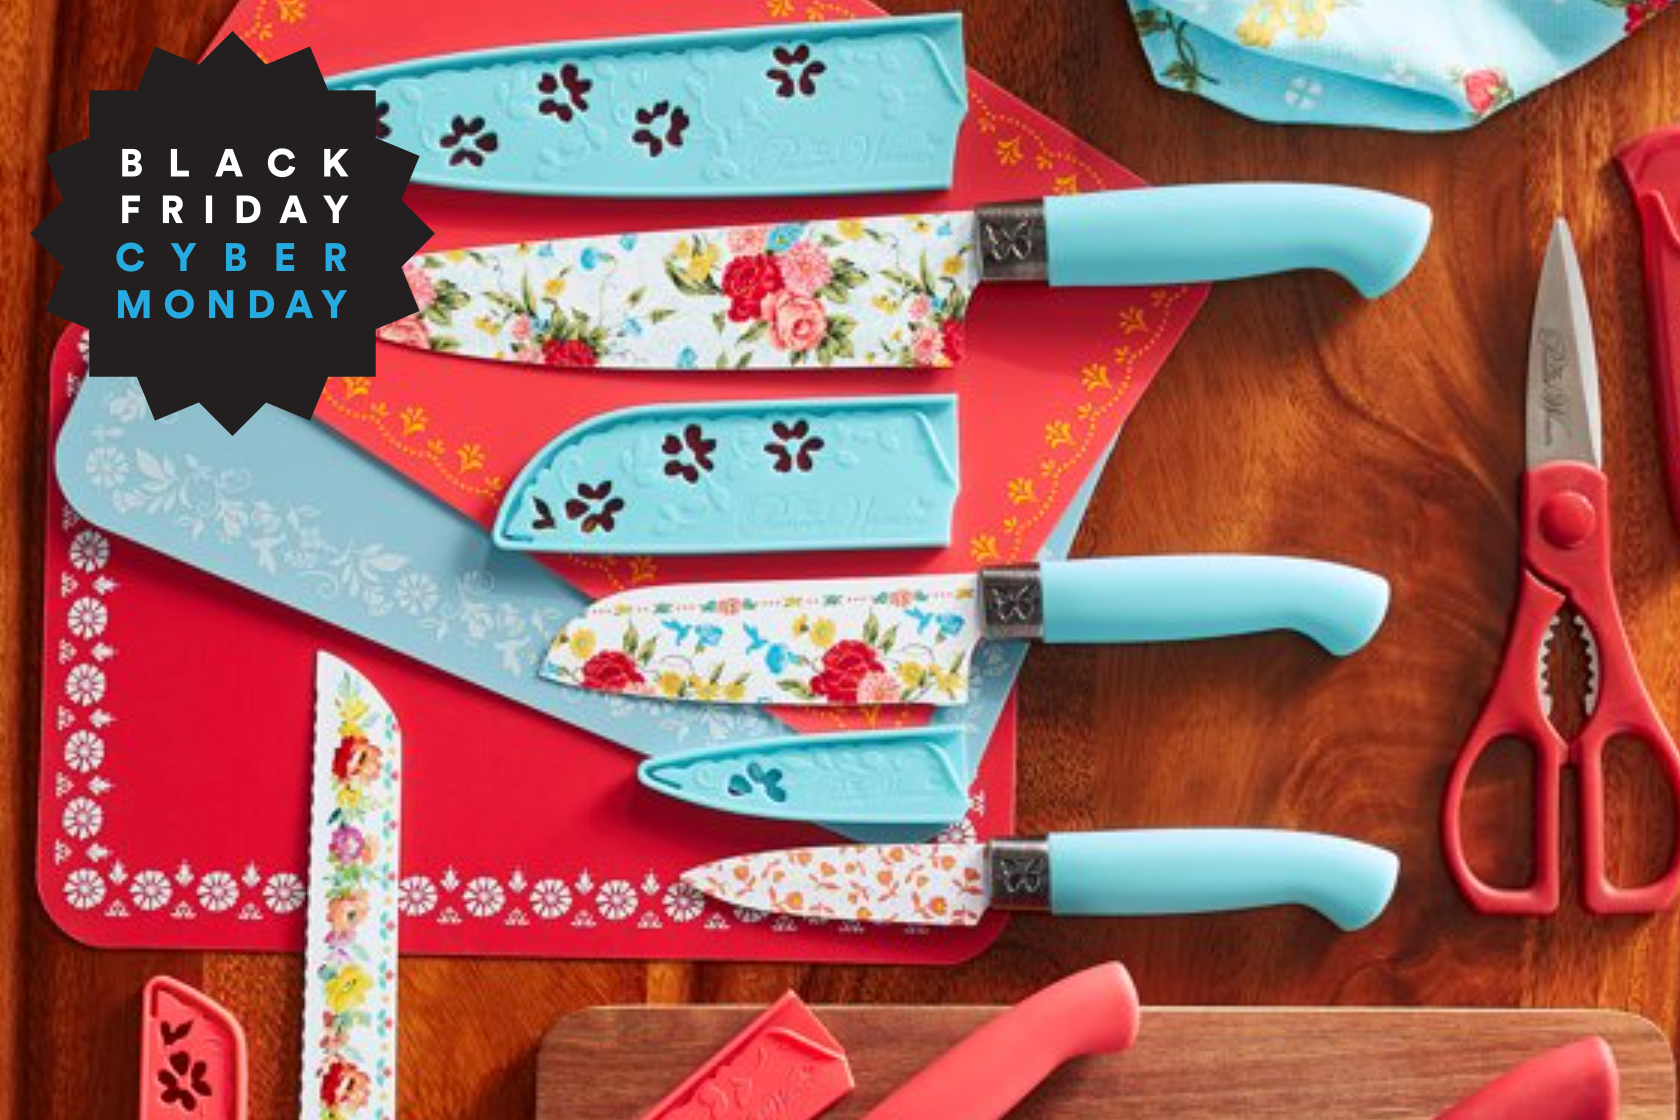 The Pioneer Woman 11-Piece Knife Set Is Under $20 Right Now